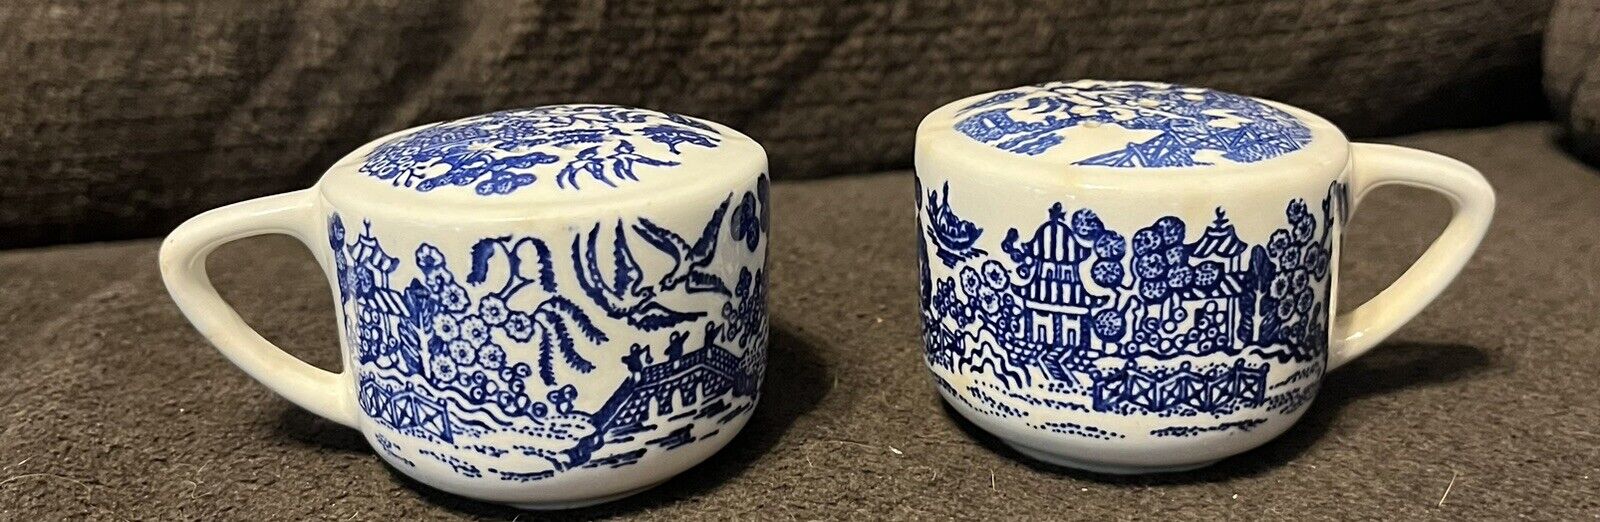 Vintage Blue Willow Ware by Royal China Salt and Pepper Shakers Blue and White